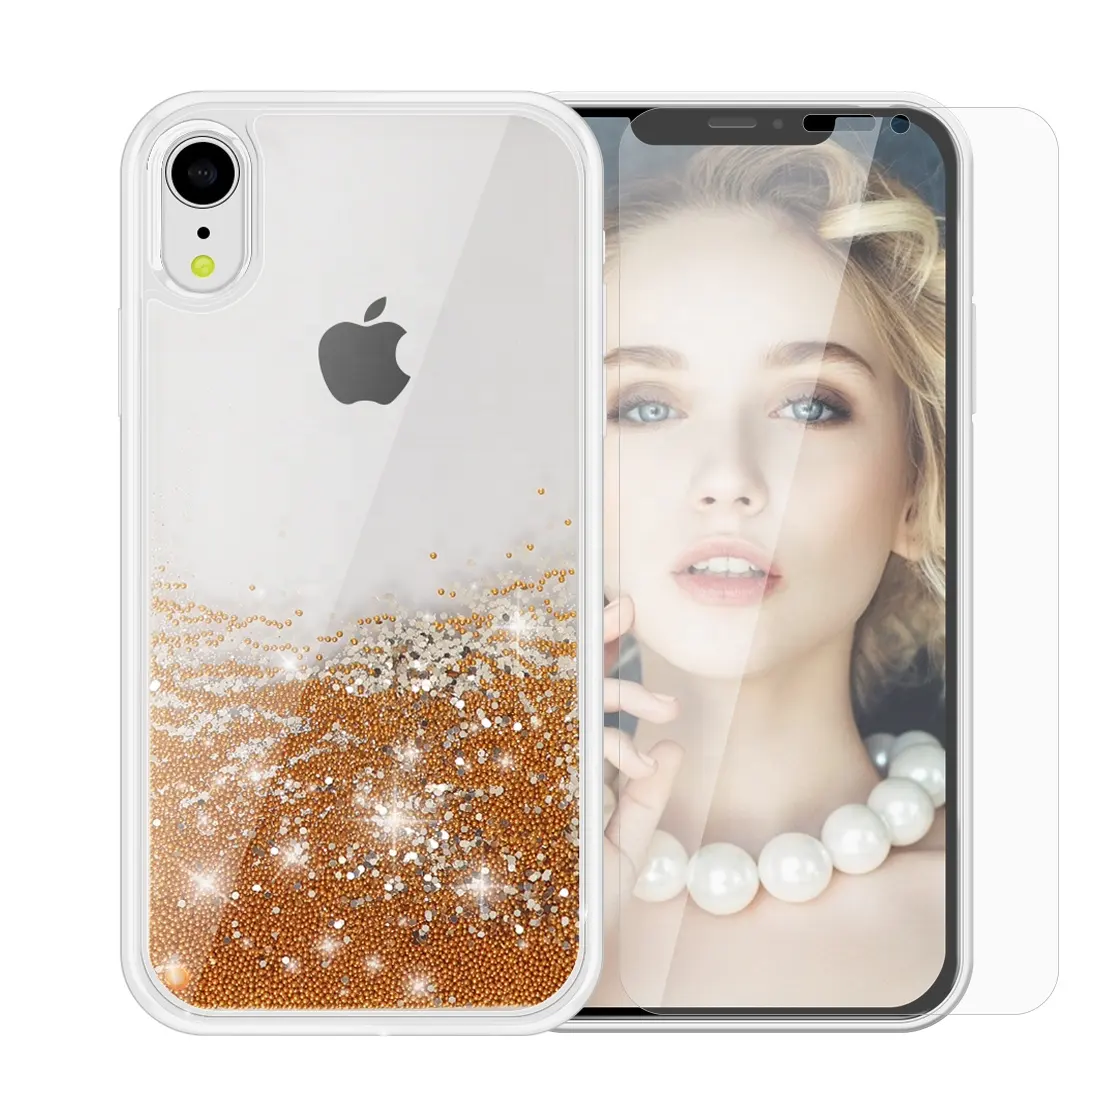 Soft DIY Luxury Custom Liquid Heart Sand Bling Gold Glitter Bubble Floating Quicksand Mobile Phone Case For iPhone 12 Pro Max